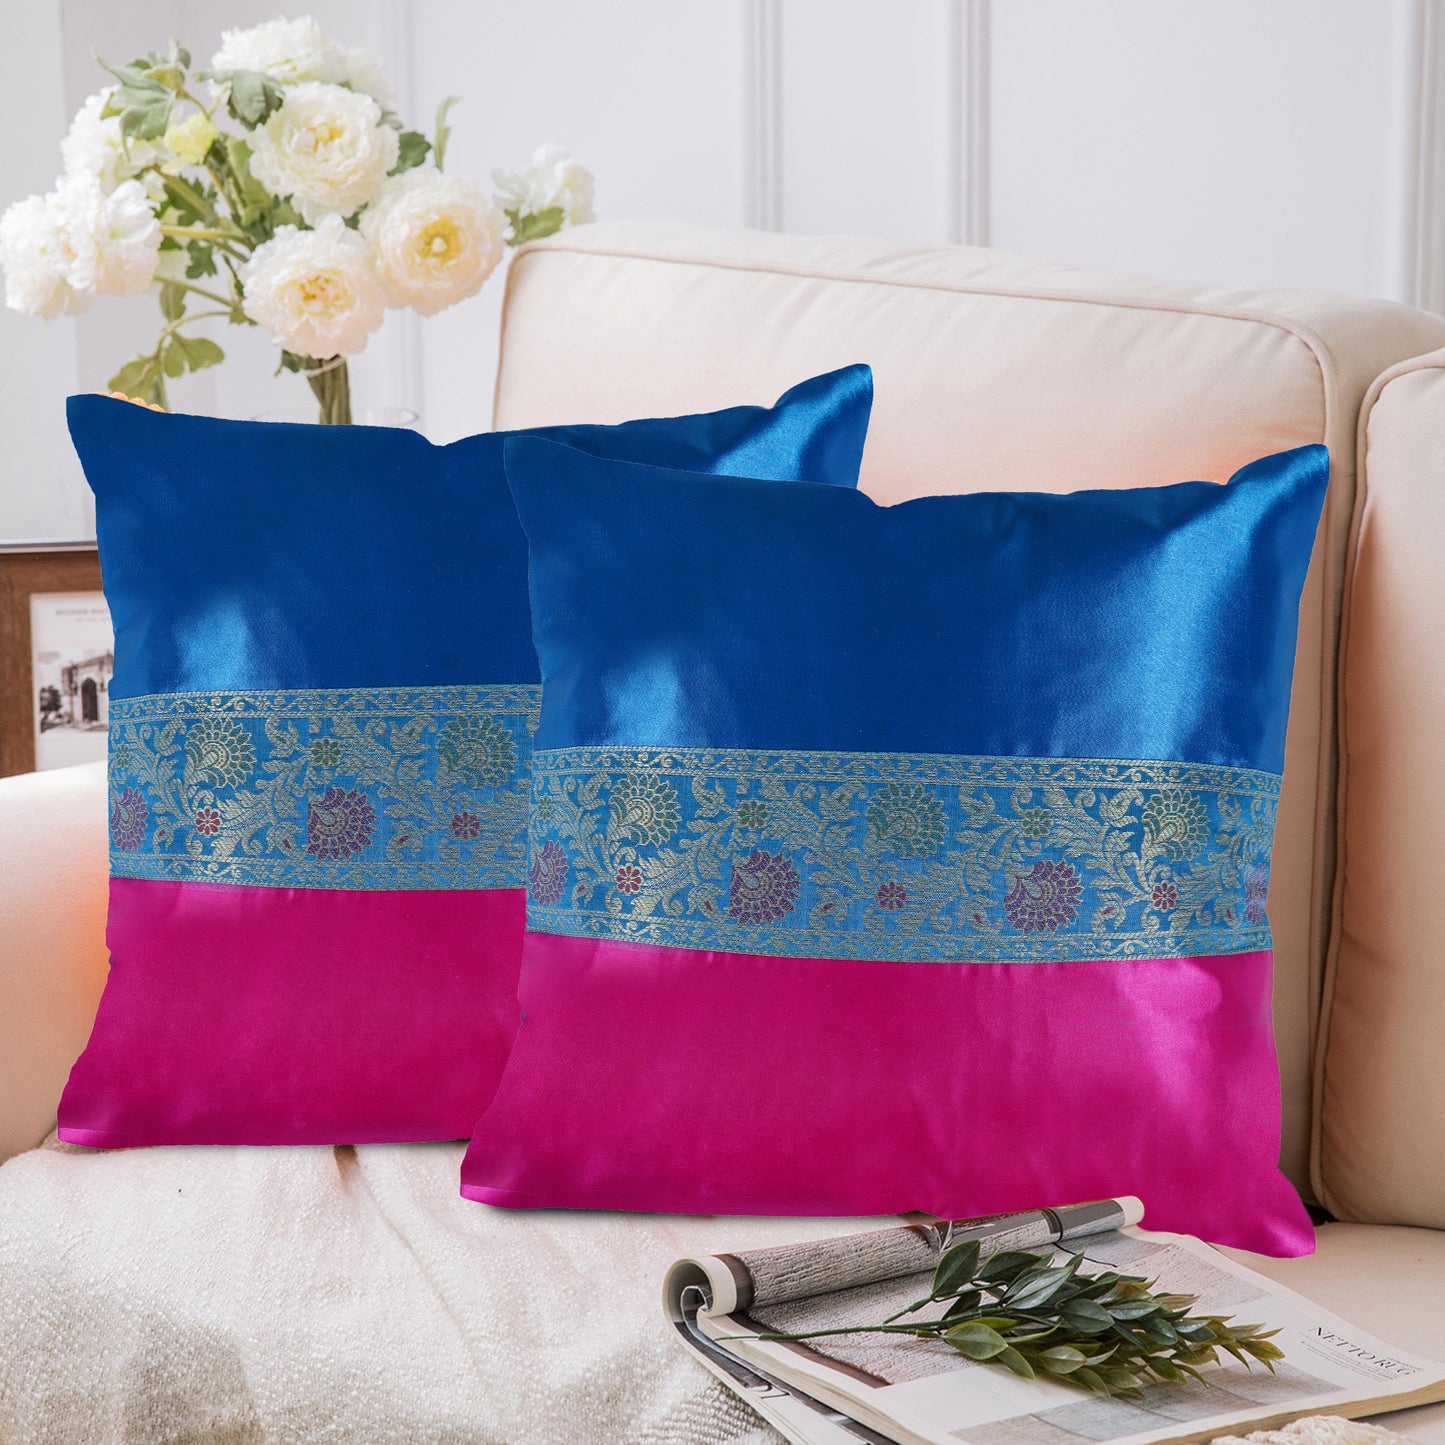 Set of 2 Pc Indian Solid Soft Silky Satin Blue & Magenta Pink Cushion Covers Square Throw Decorative Pillowcases for Couch Sofa Home Décor 16X16 In